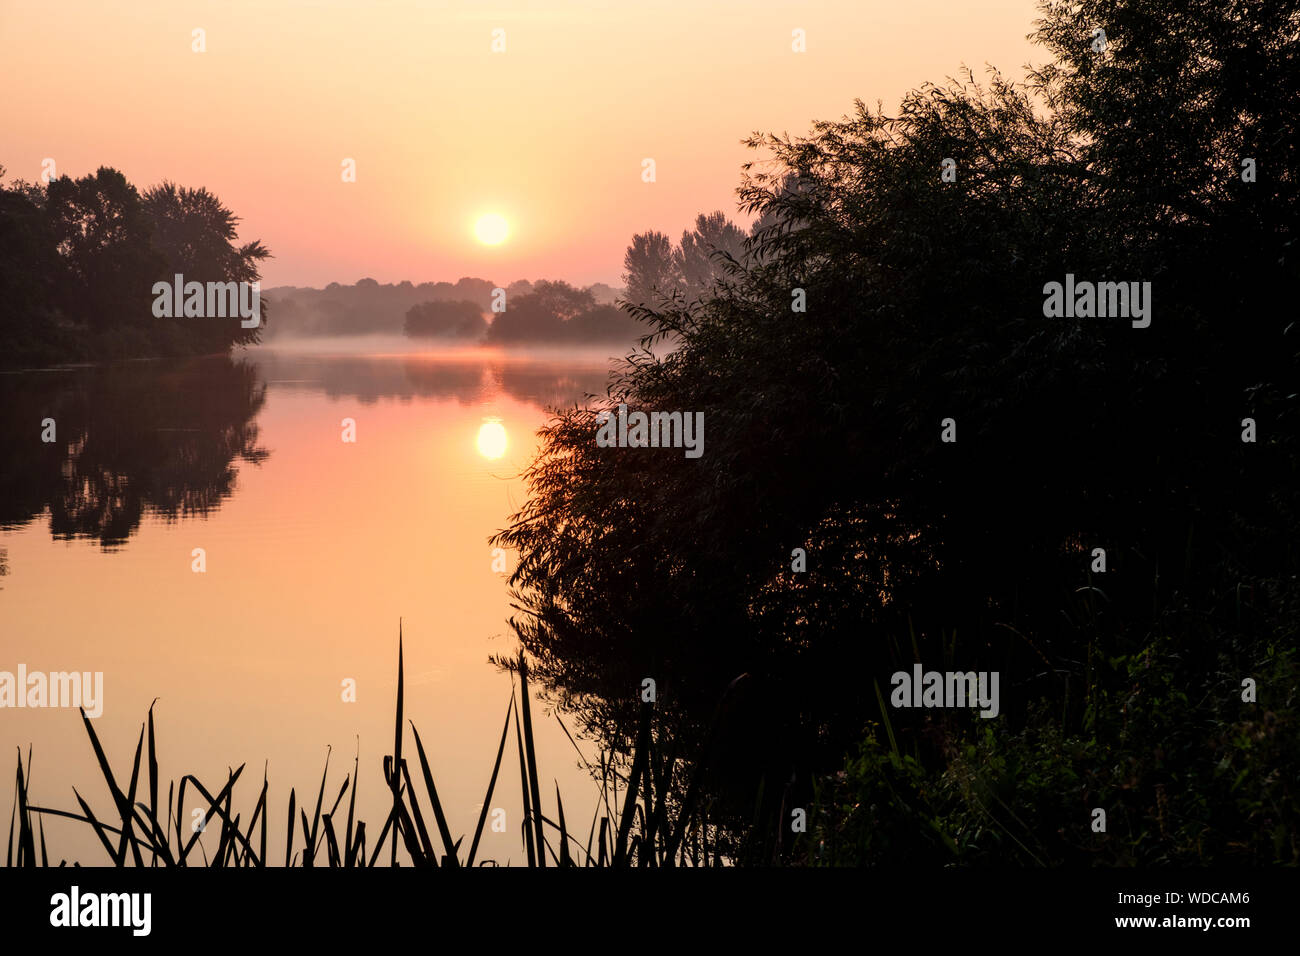 Dawn in Summer. Sunrise over the River Trent, trees and countryside, Nottinghamshire, England, UK Stock Photo